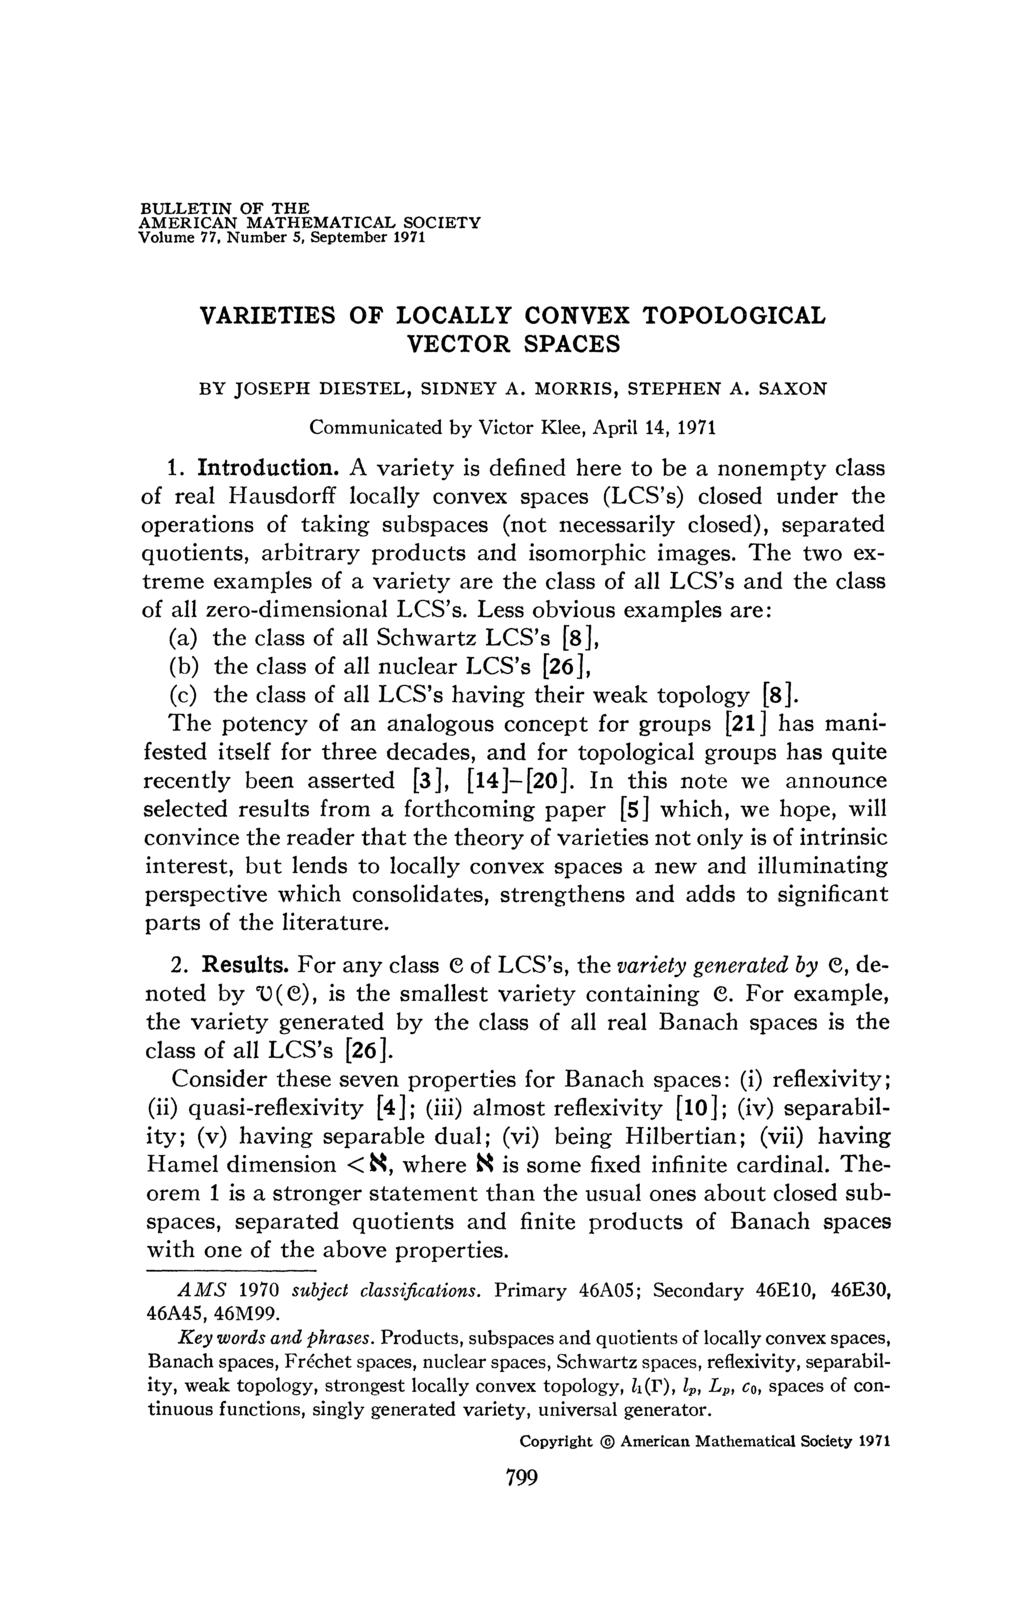 BULLETIN OF THE AMERICAN MATHEMATICAL SOCIETY Volume 77, Number 5, September 1971 VARIETIES OF LOCALLY CONVEX TOPOLOGICAL VECTOR SPACES BY JOSEPH DIESTEL, SIDNEY A. MORRIS, STEPHEN A.